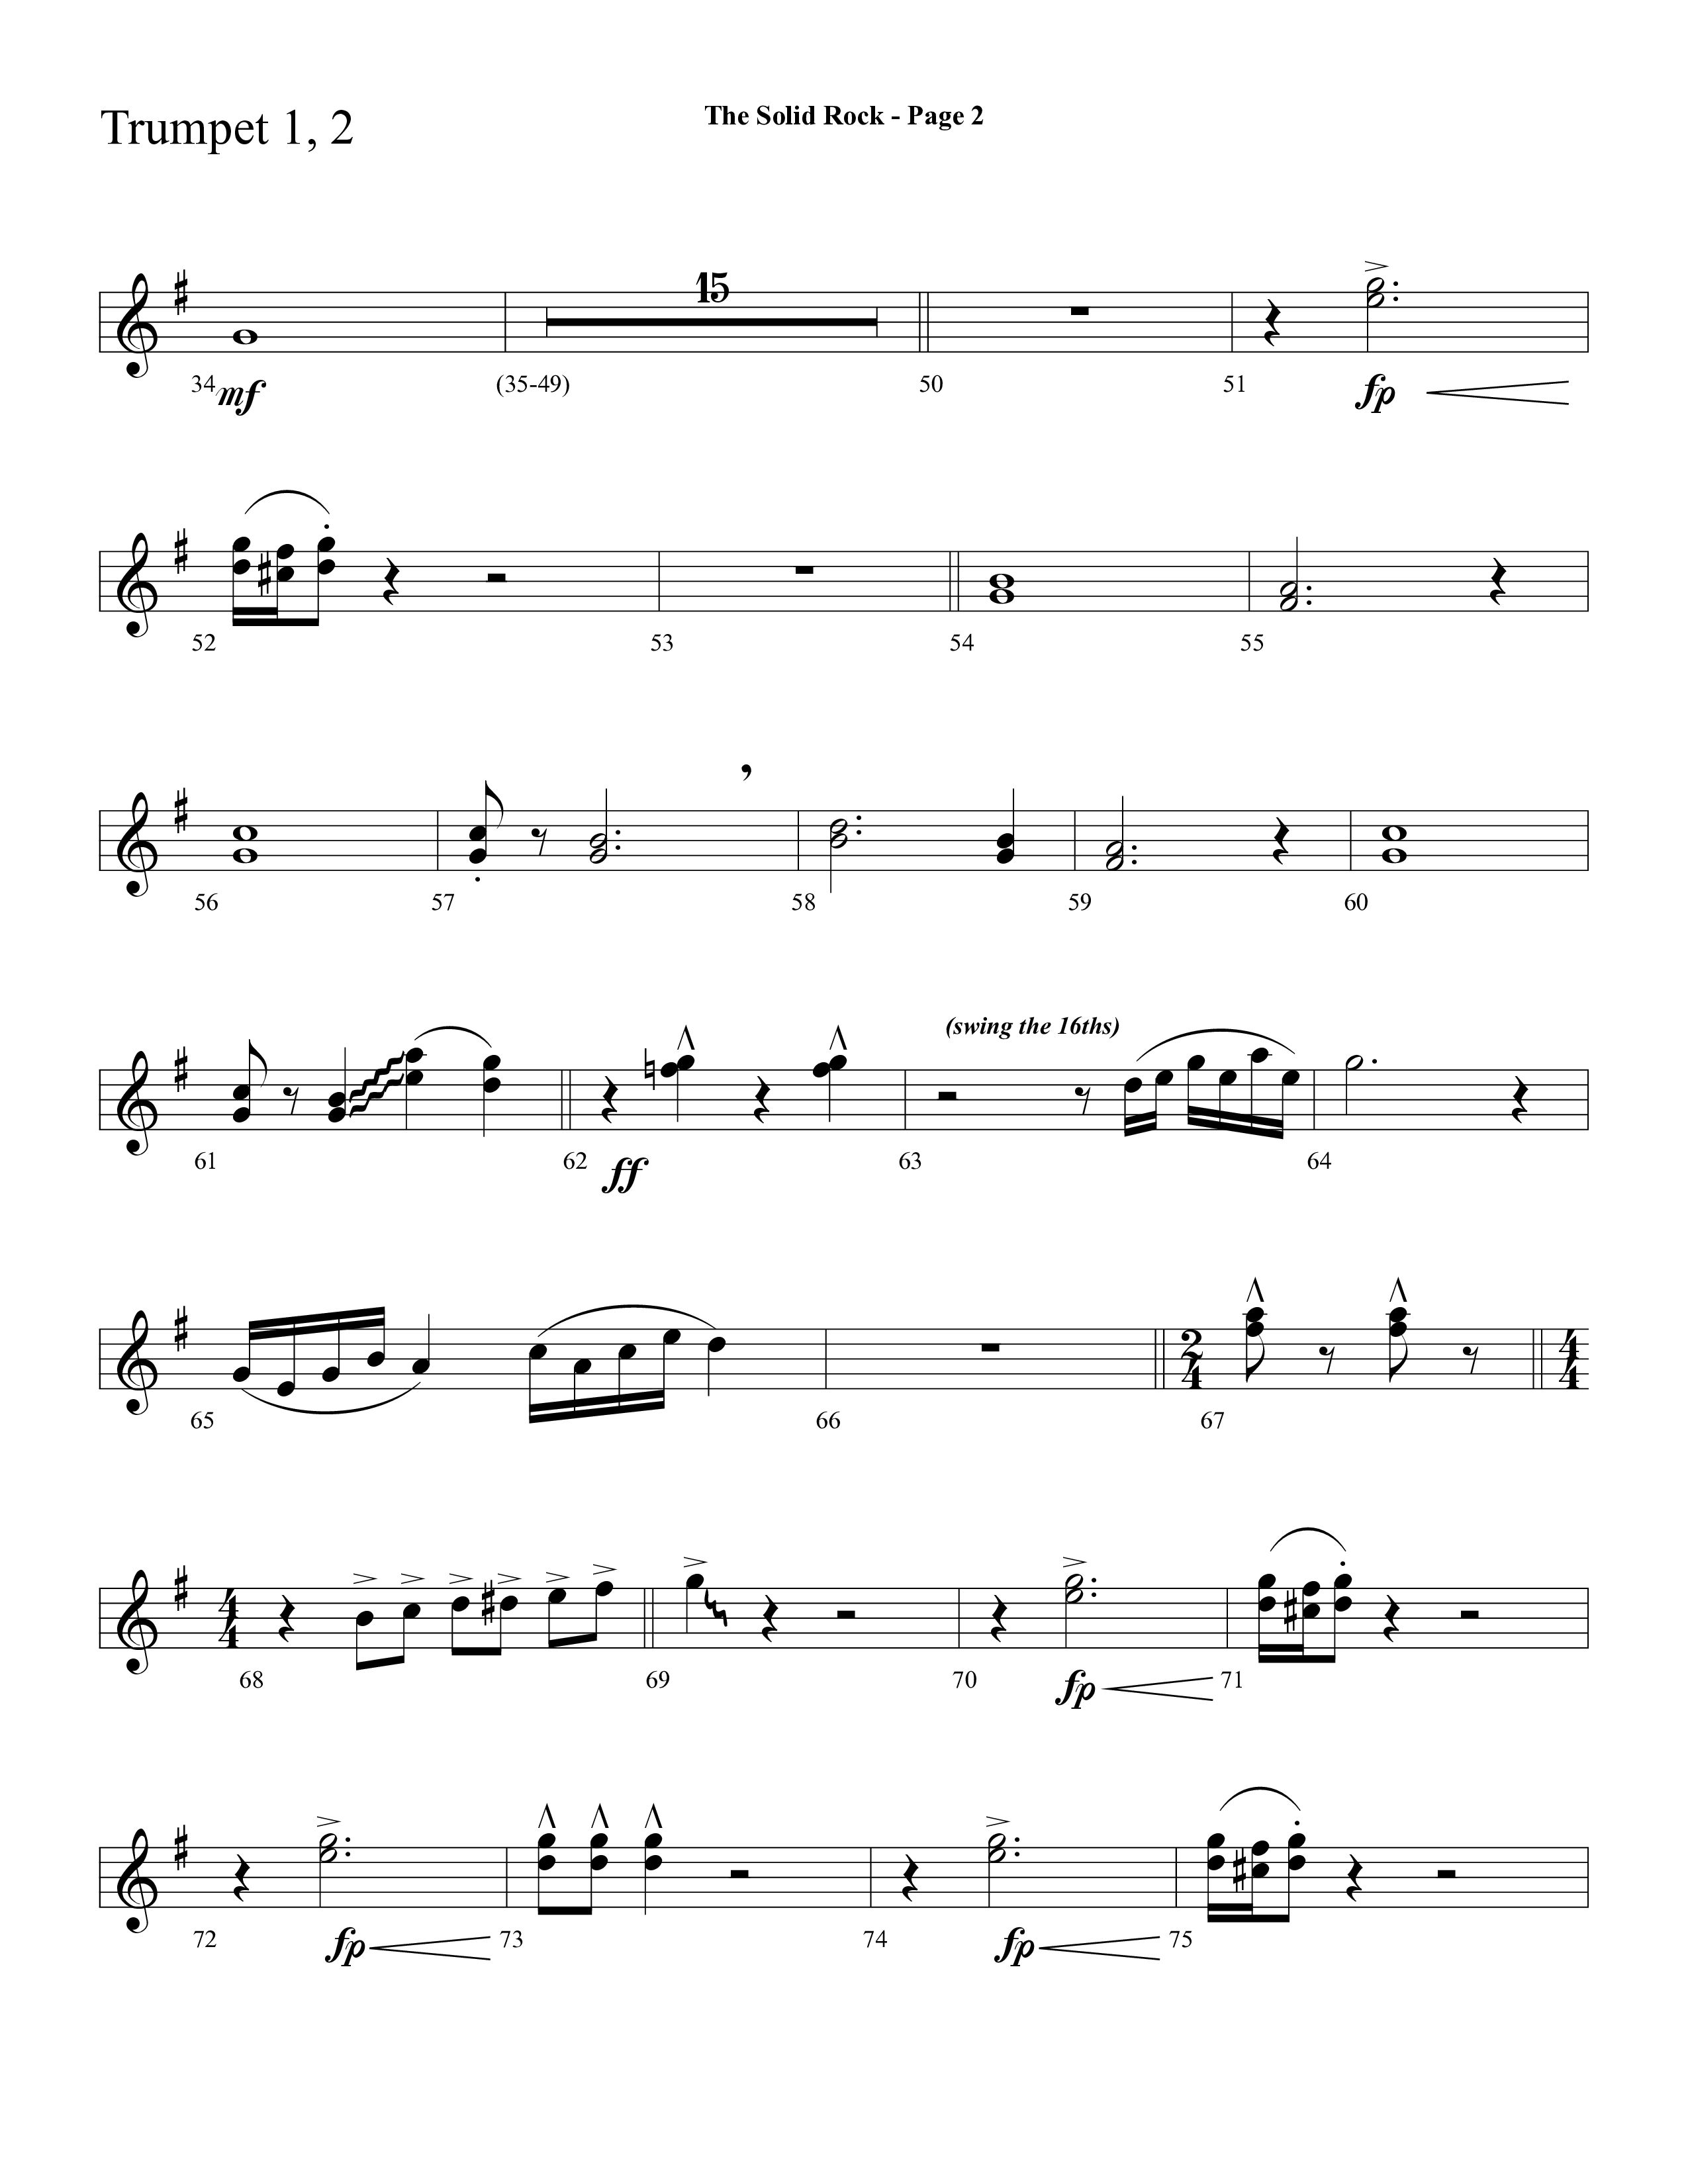 The Solid Rock (with How Firm A Foundation) (Choral Anthem SATB) Trumpet 1,2 (Lifeway Choral / Arr. Dave Williamson)